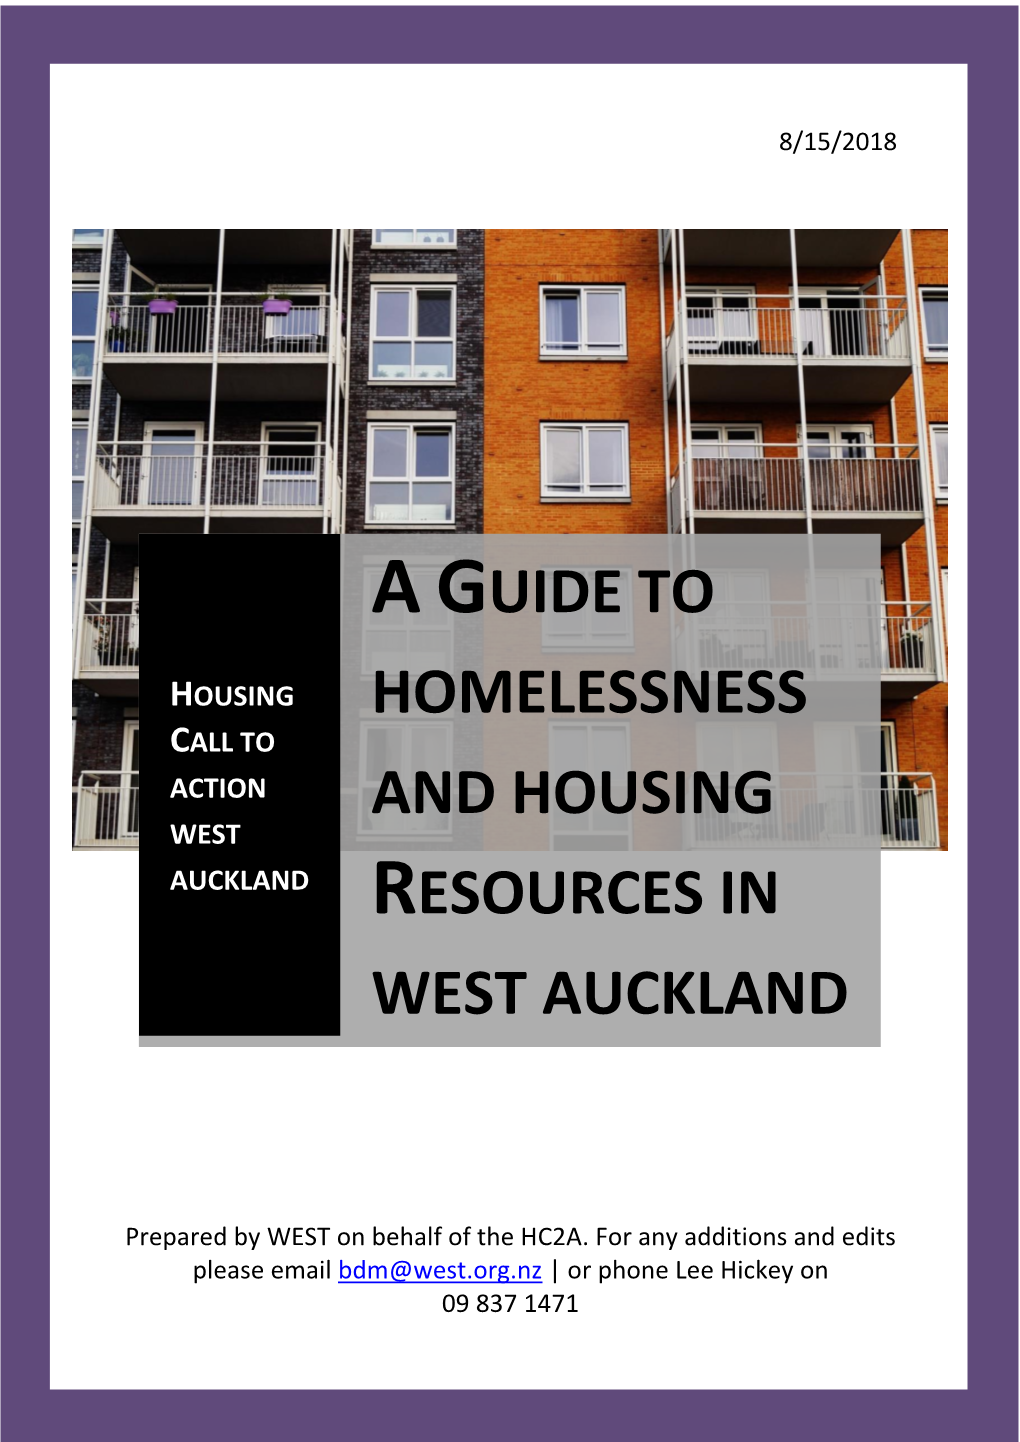 A Guide to Homelessness and Housing Resources in West Auckland